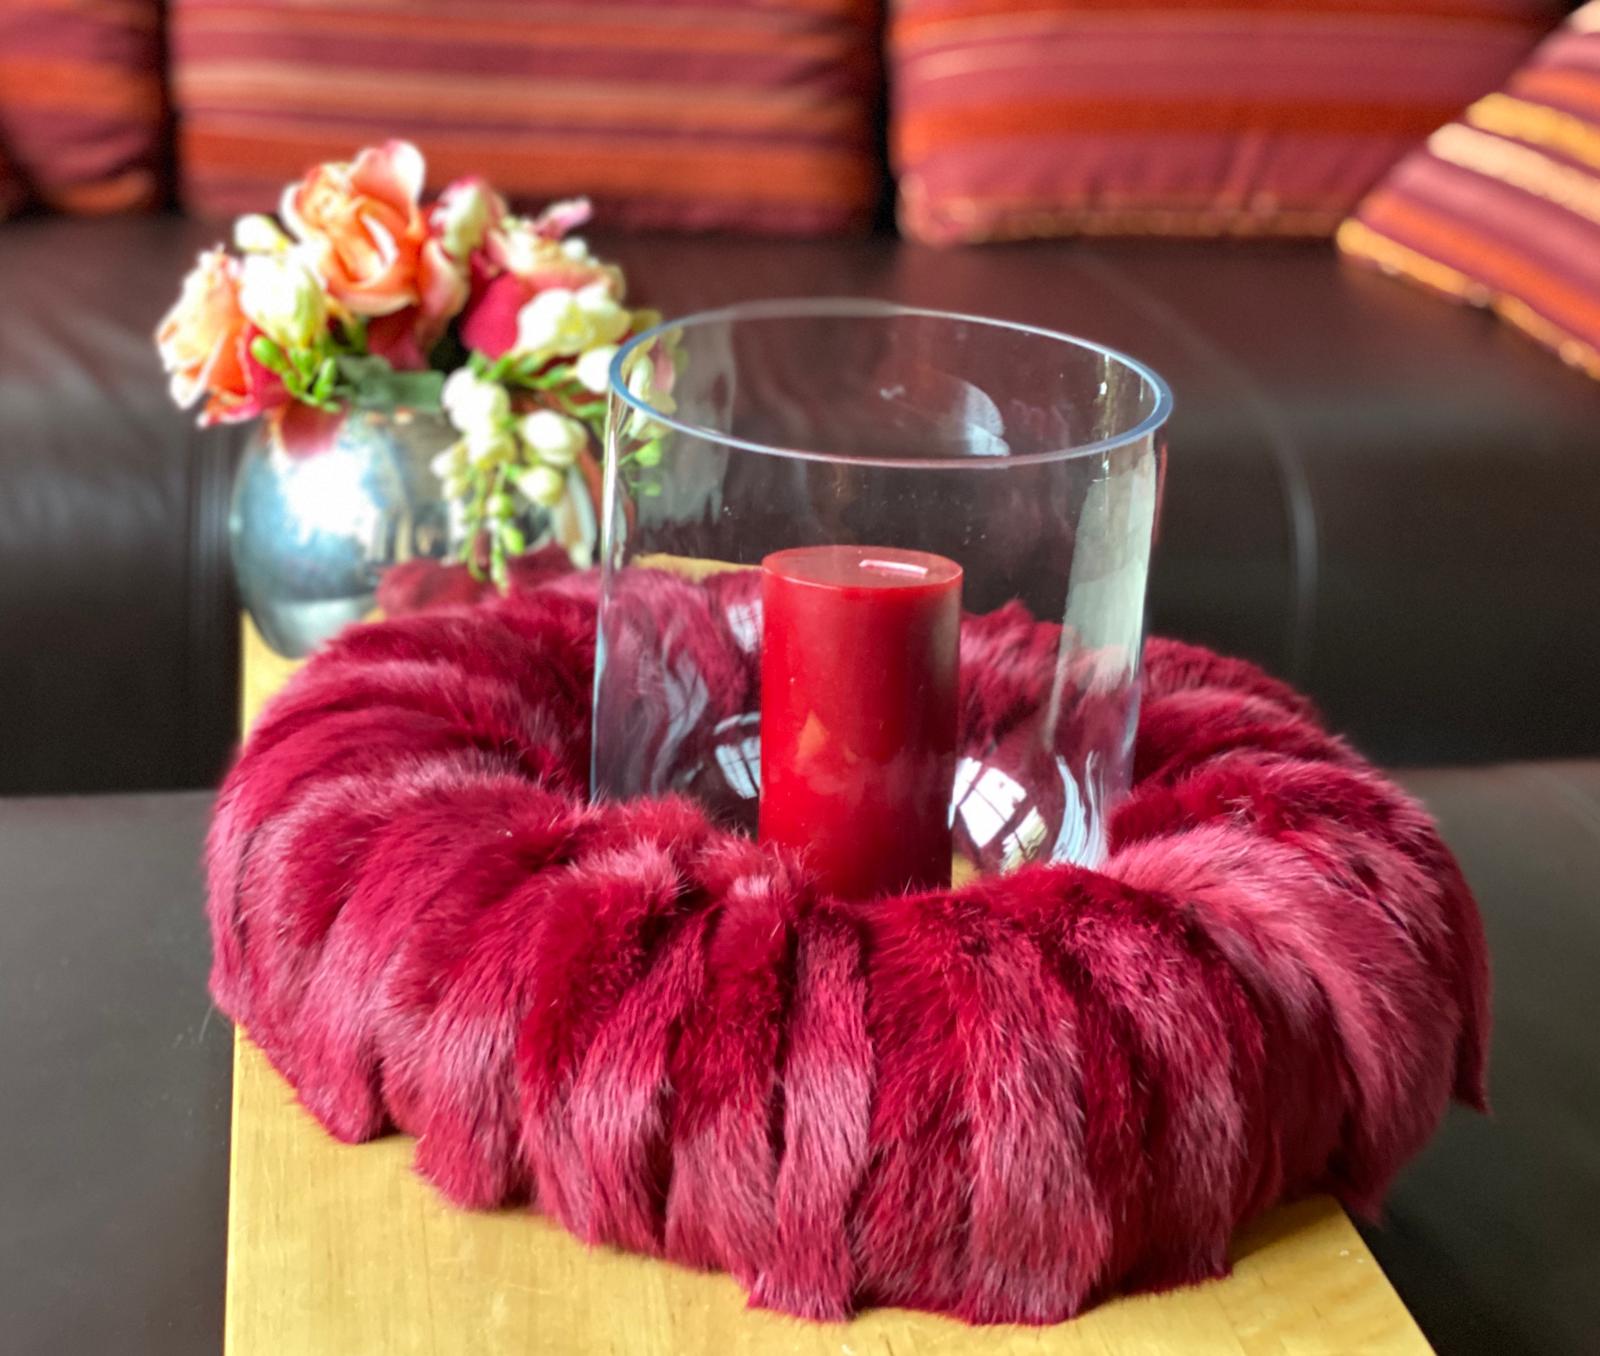 "Upcycling ....for luxury home !" Adventskranz Bordeaux rot dunkelrot als Jahresdekoration  L